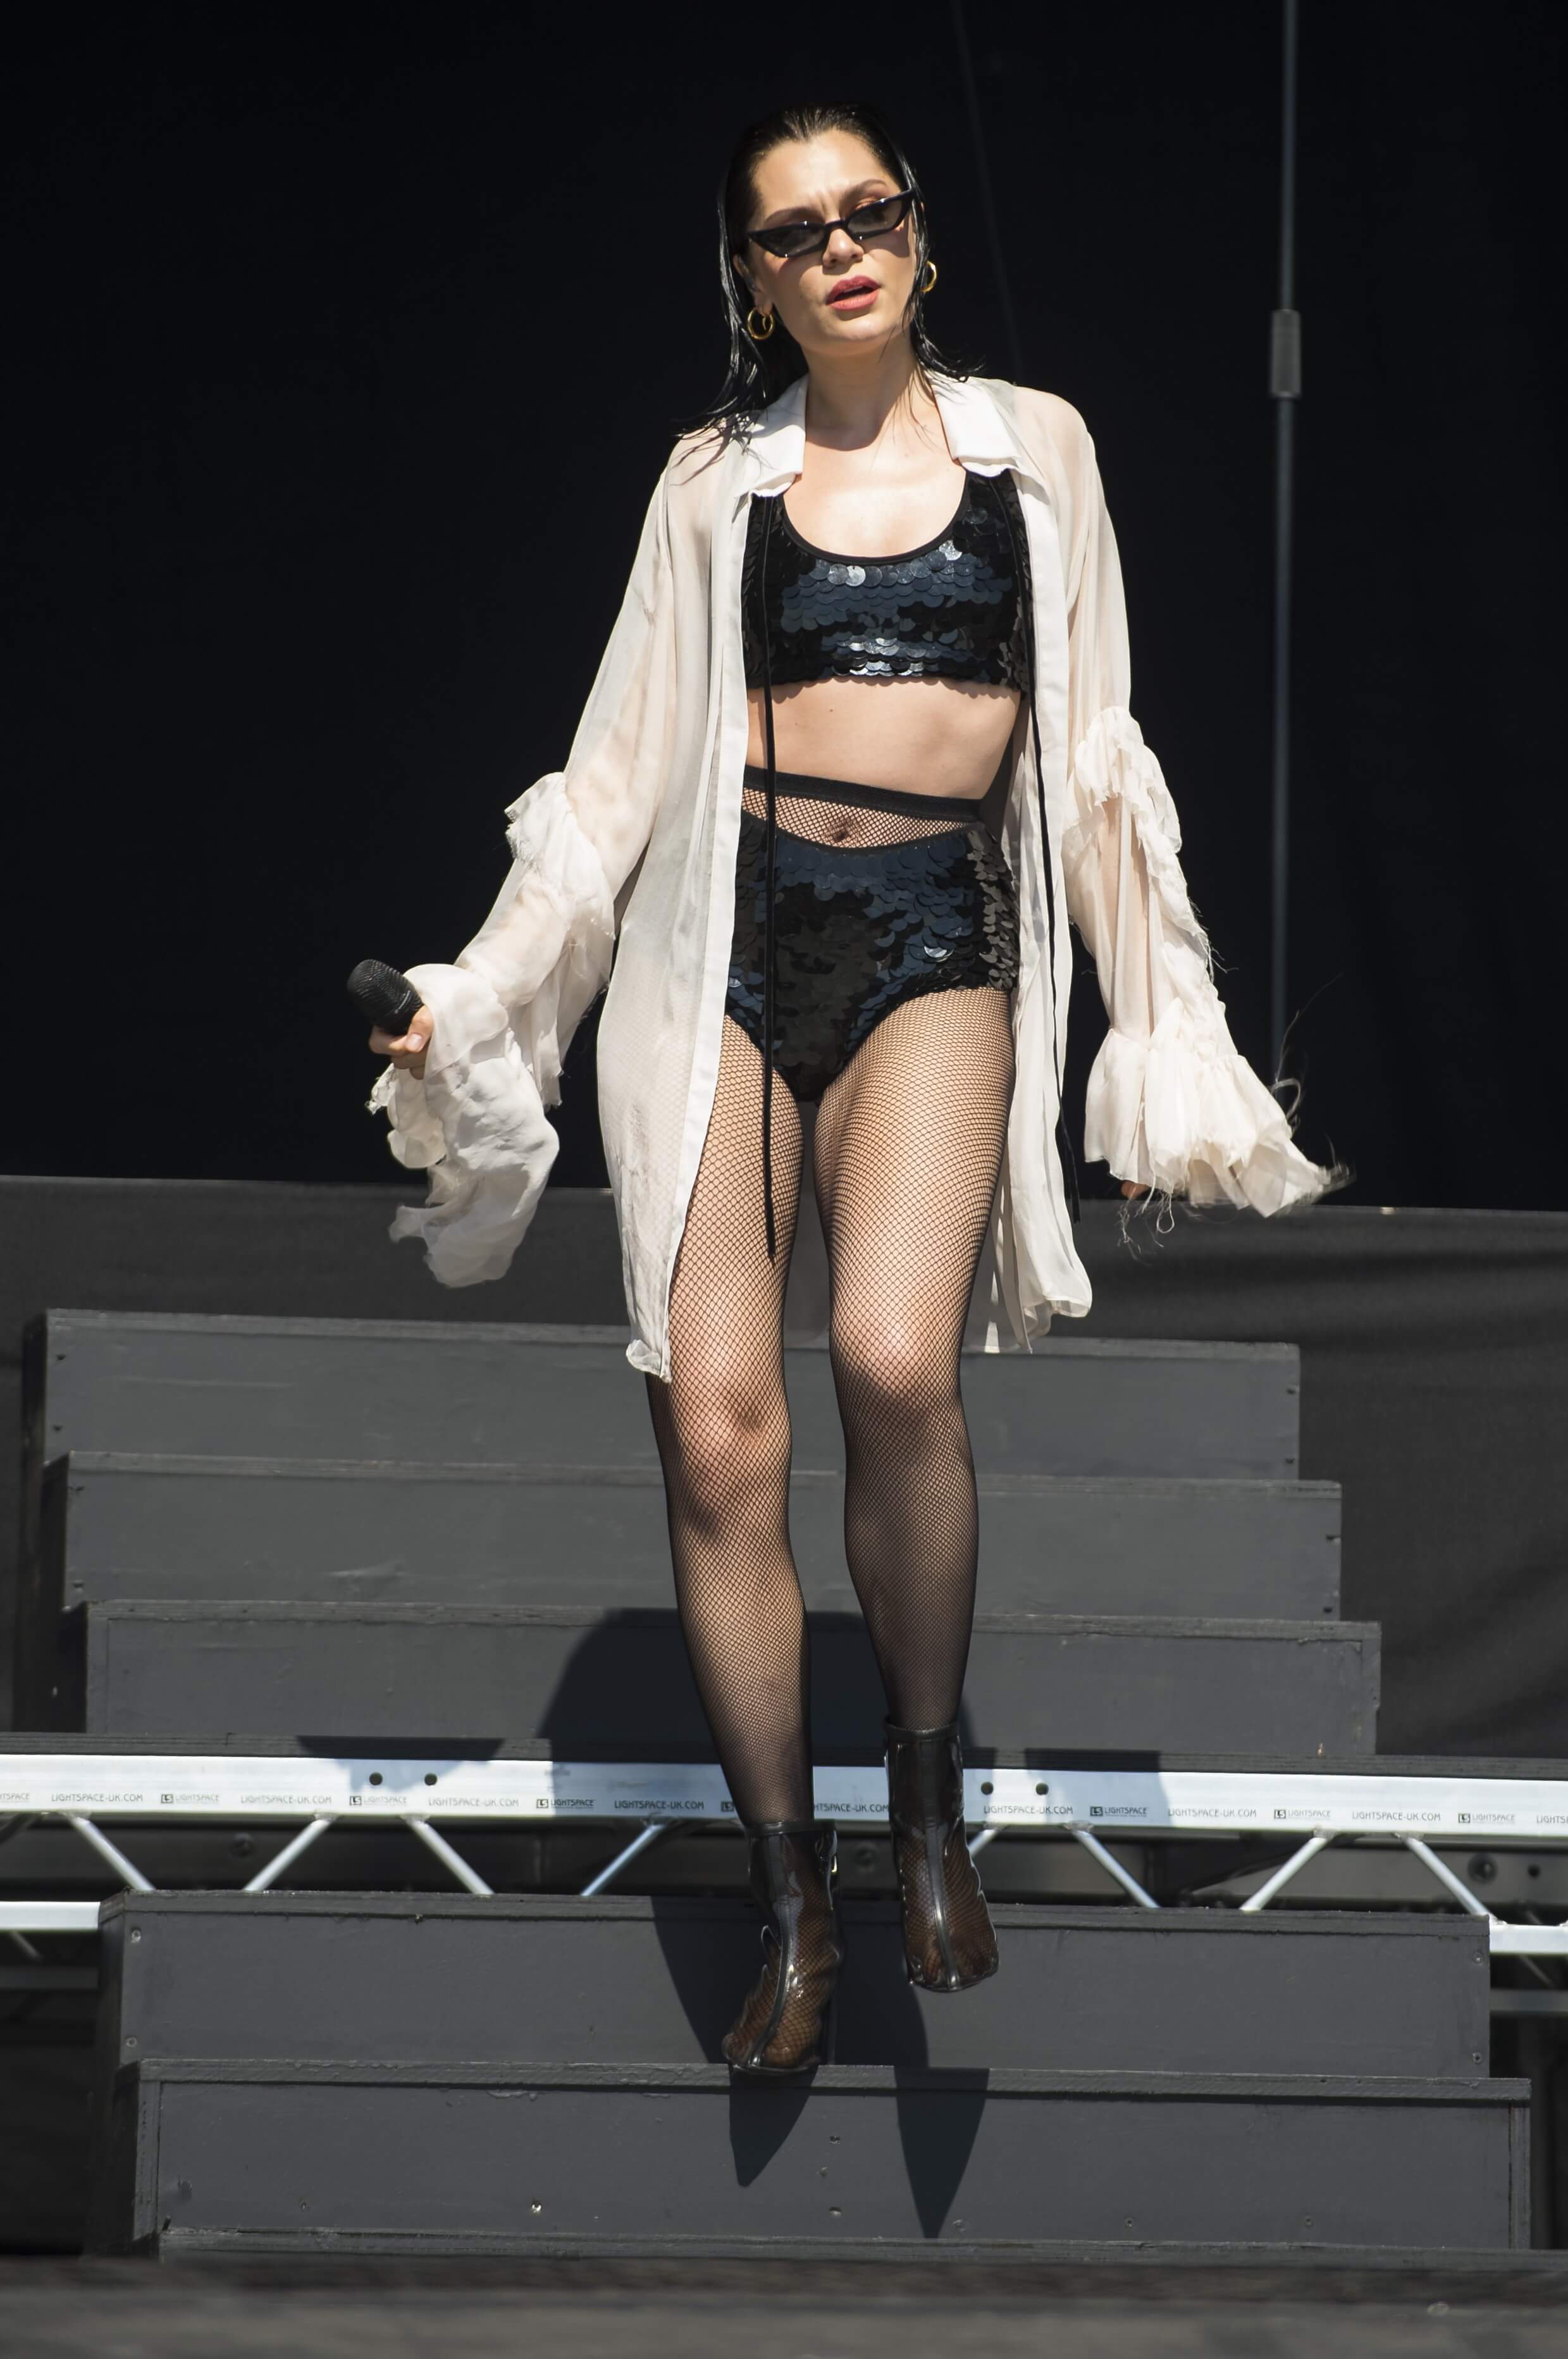 49 Hot Bikini Pictures Of Jessie J Which Will Make Your Hands Want Her | Best Of Comic Books